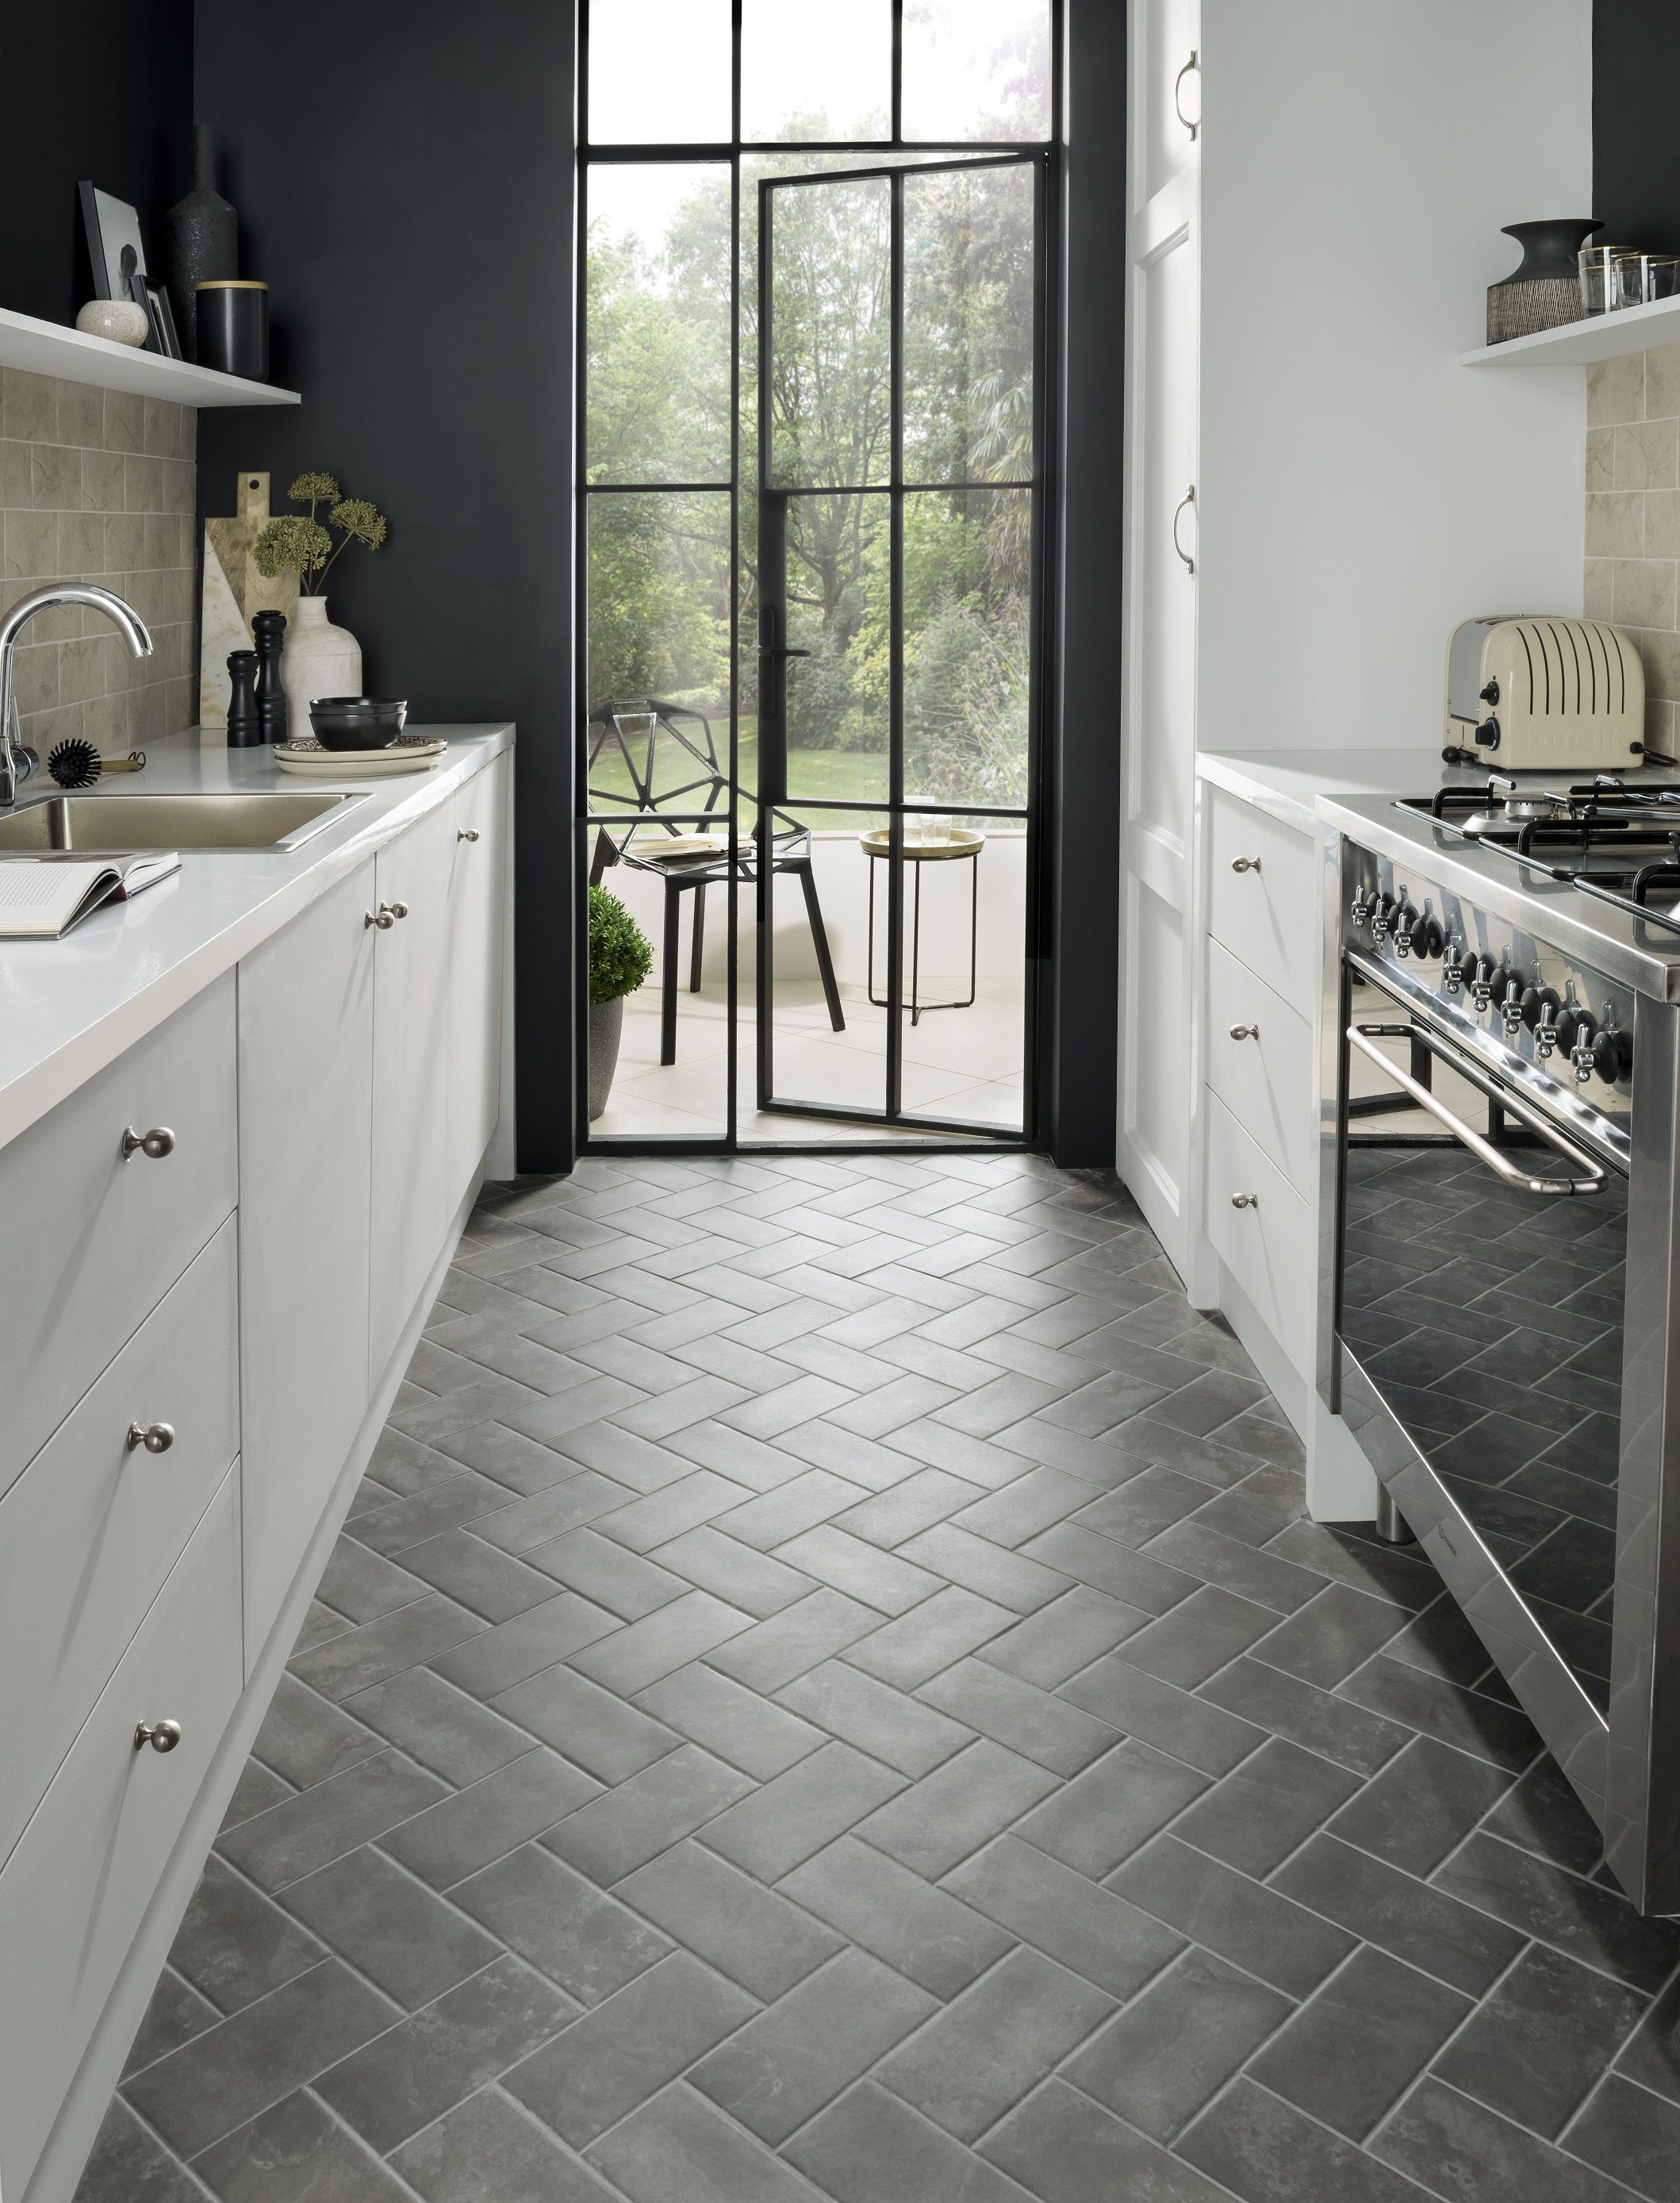 11 Tile Design Ideas To Make A Small Kitchen Feel Bigger intended for measurements 2118 X 2777